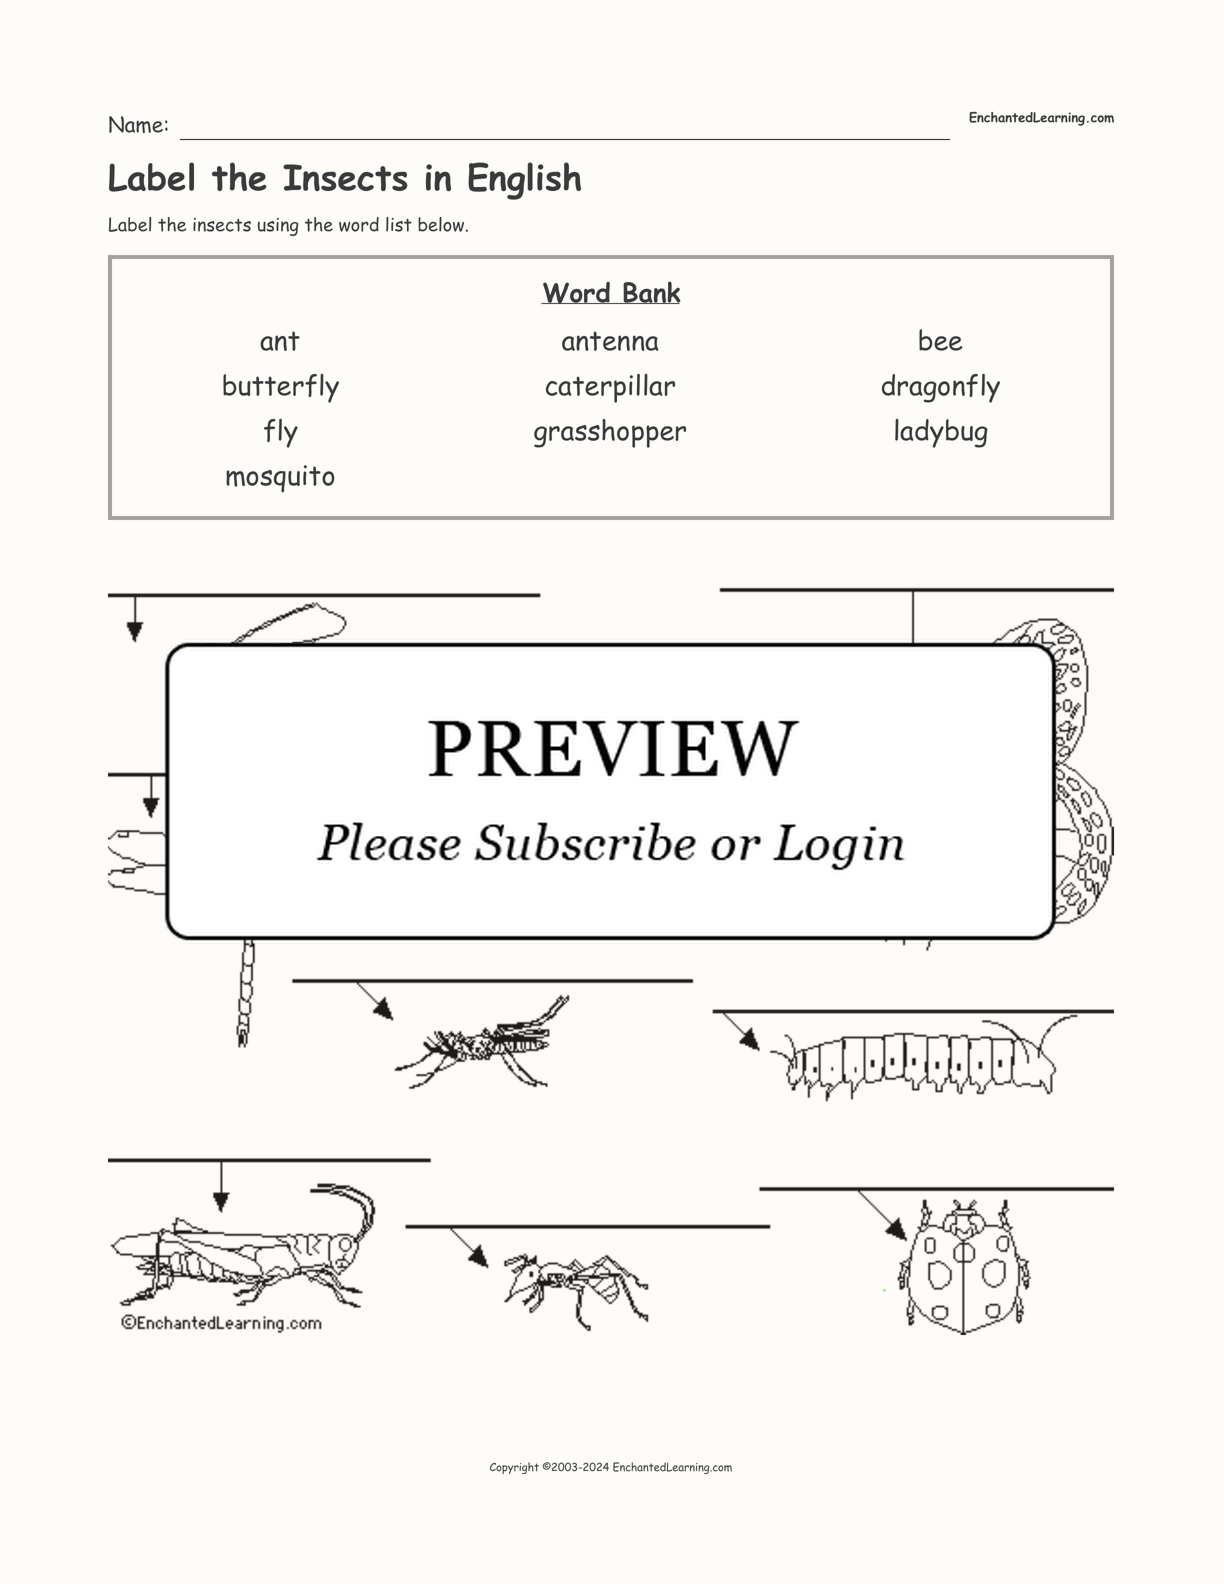 Label the Insects in English interactive worksheet page 1